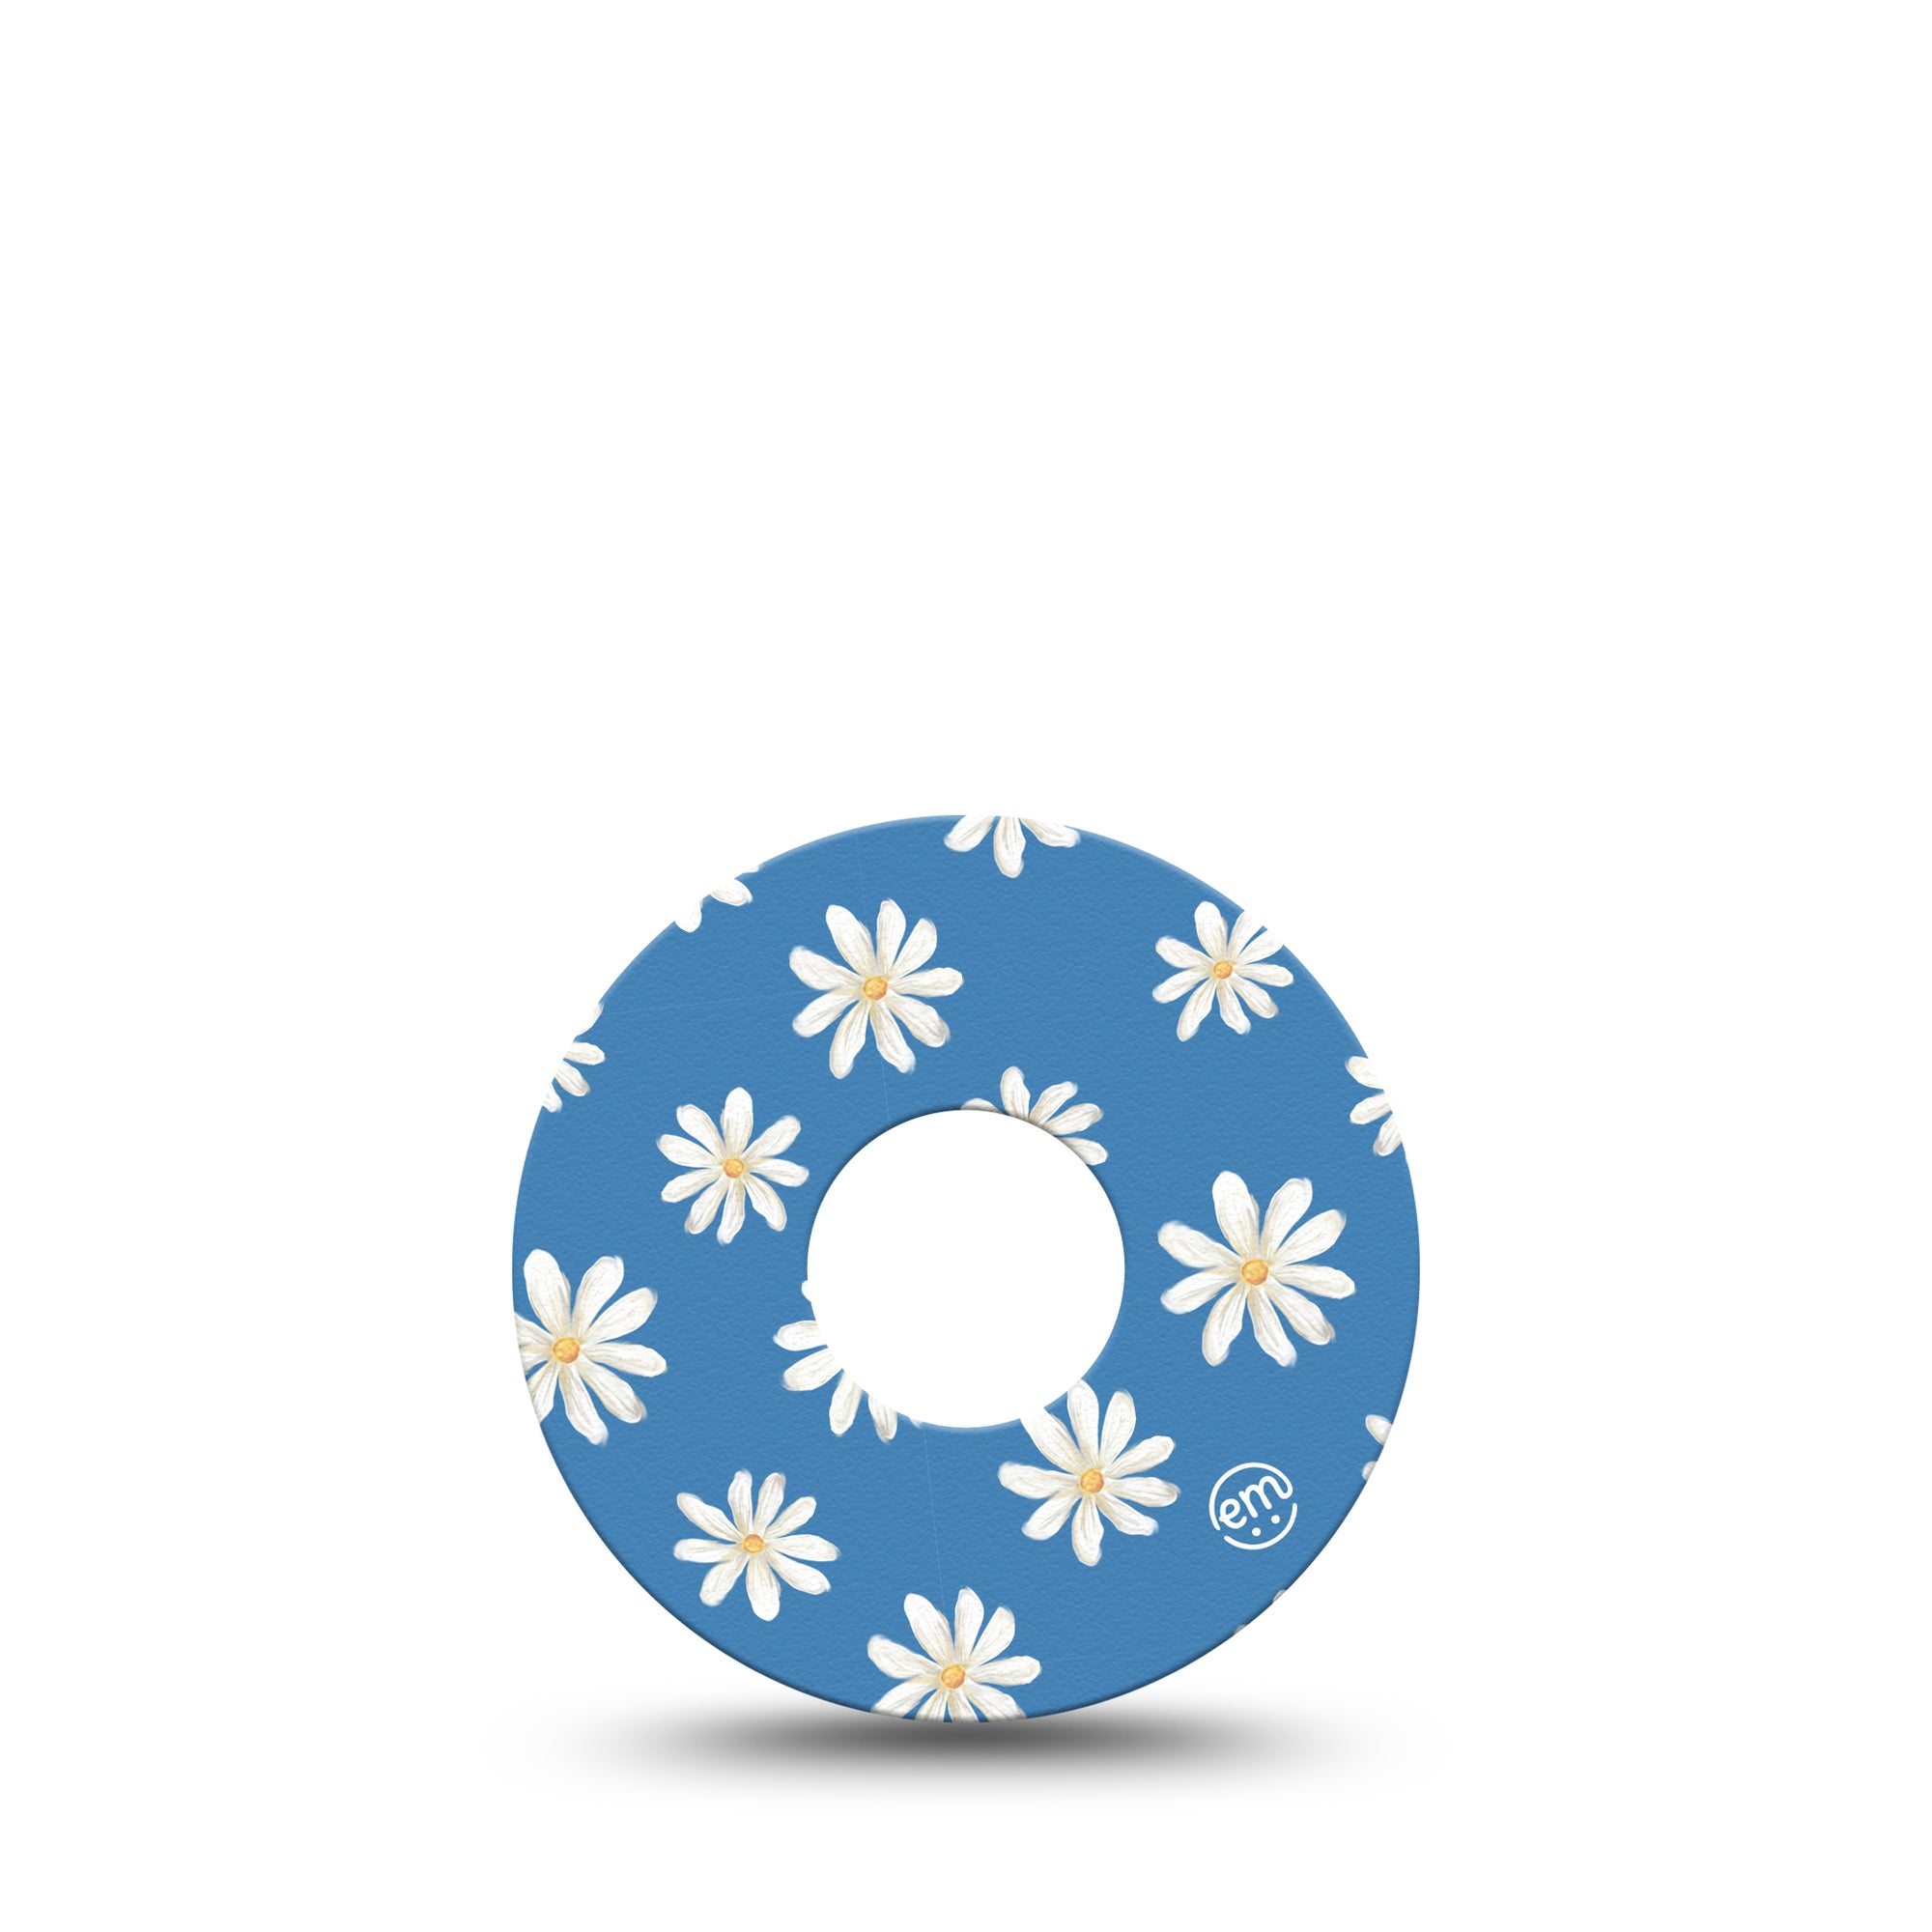 ExpressionMed Painted Daisies Libre 3 Tape, Single, Daisy Print Inspired, CGM Patch Design